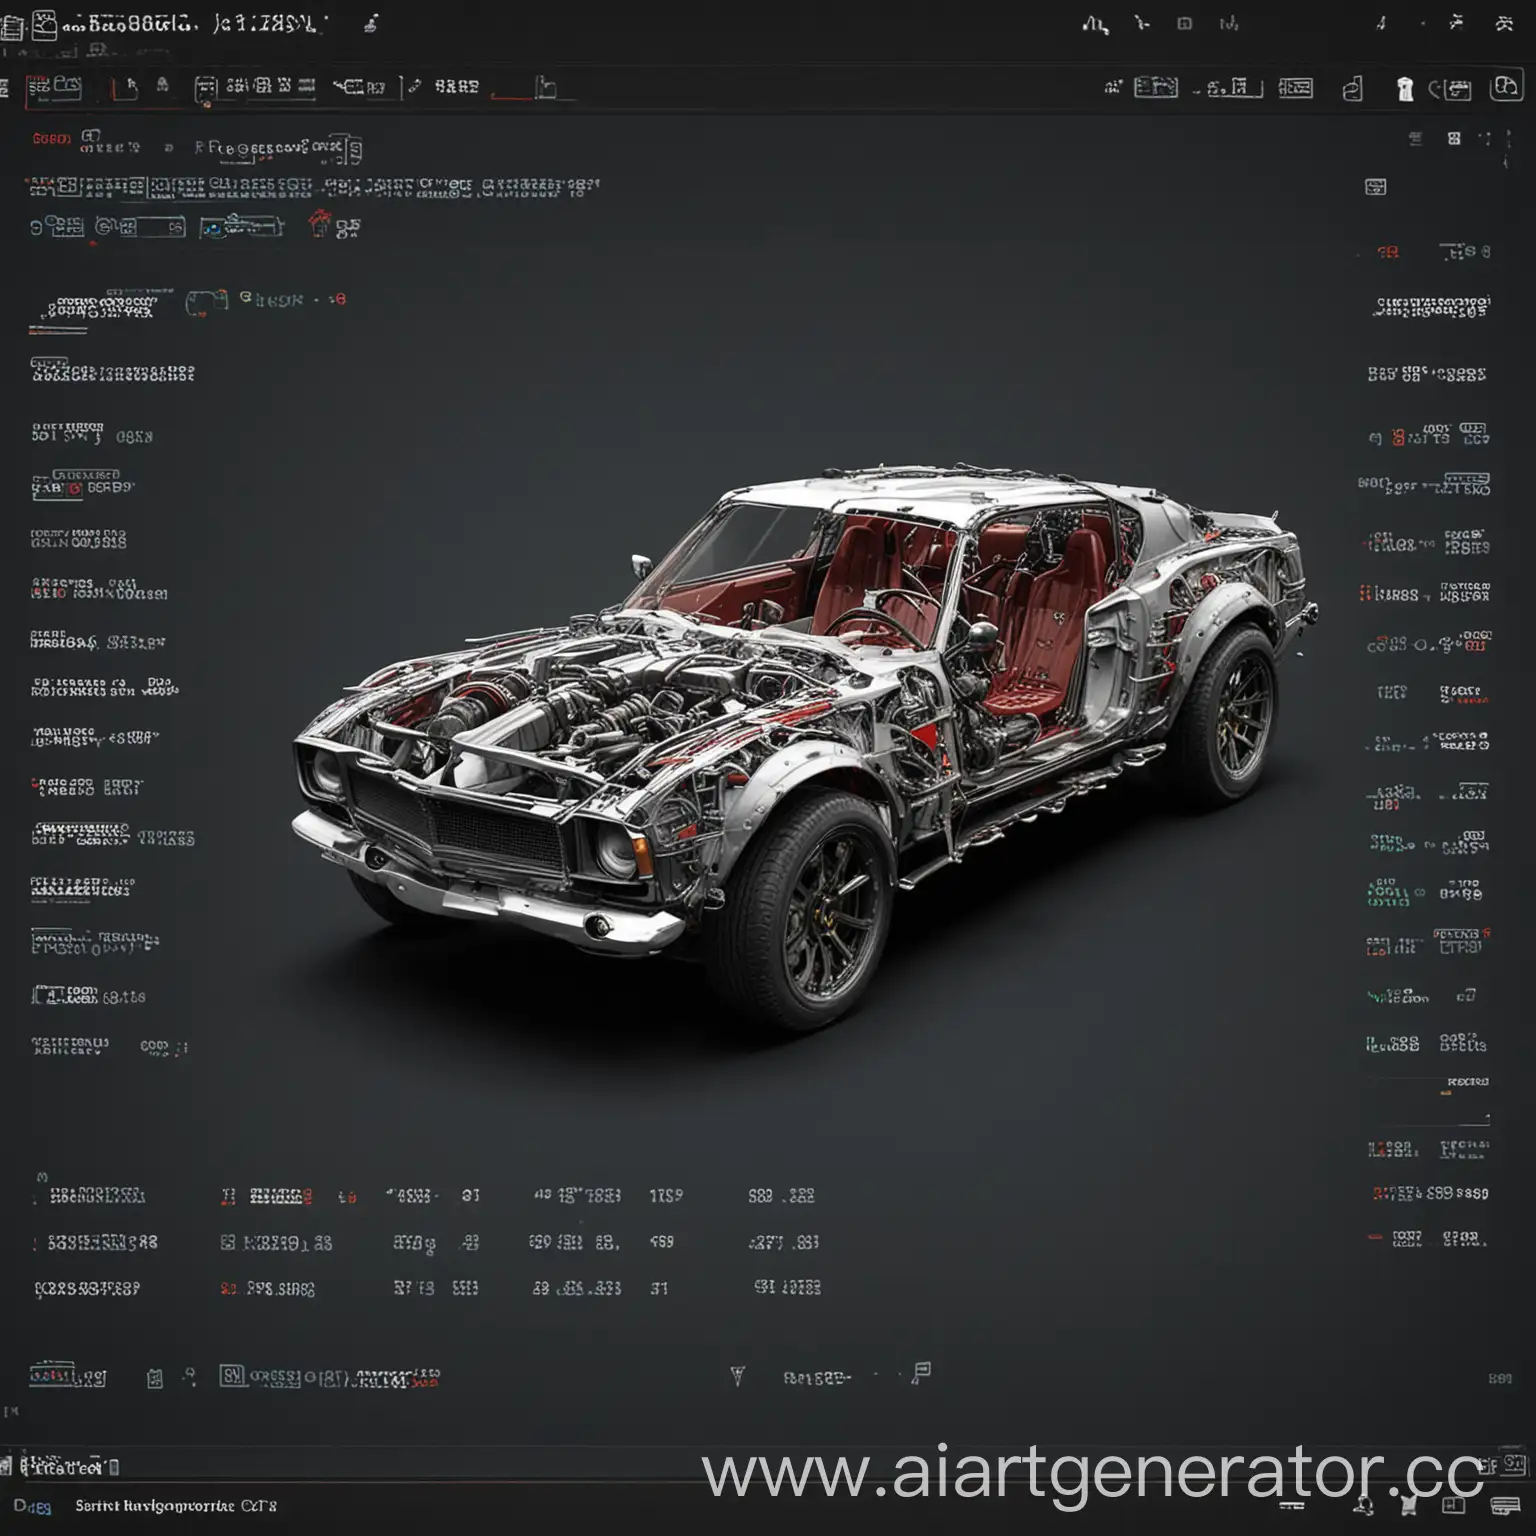 Exaggerated-Car-Parts-and-Program-Code-Displayed-in-Program-Startup-Image